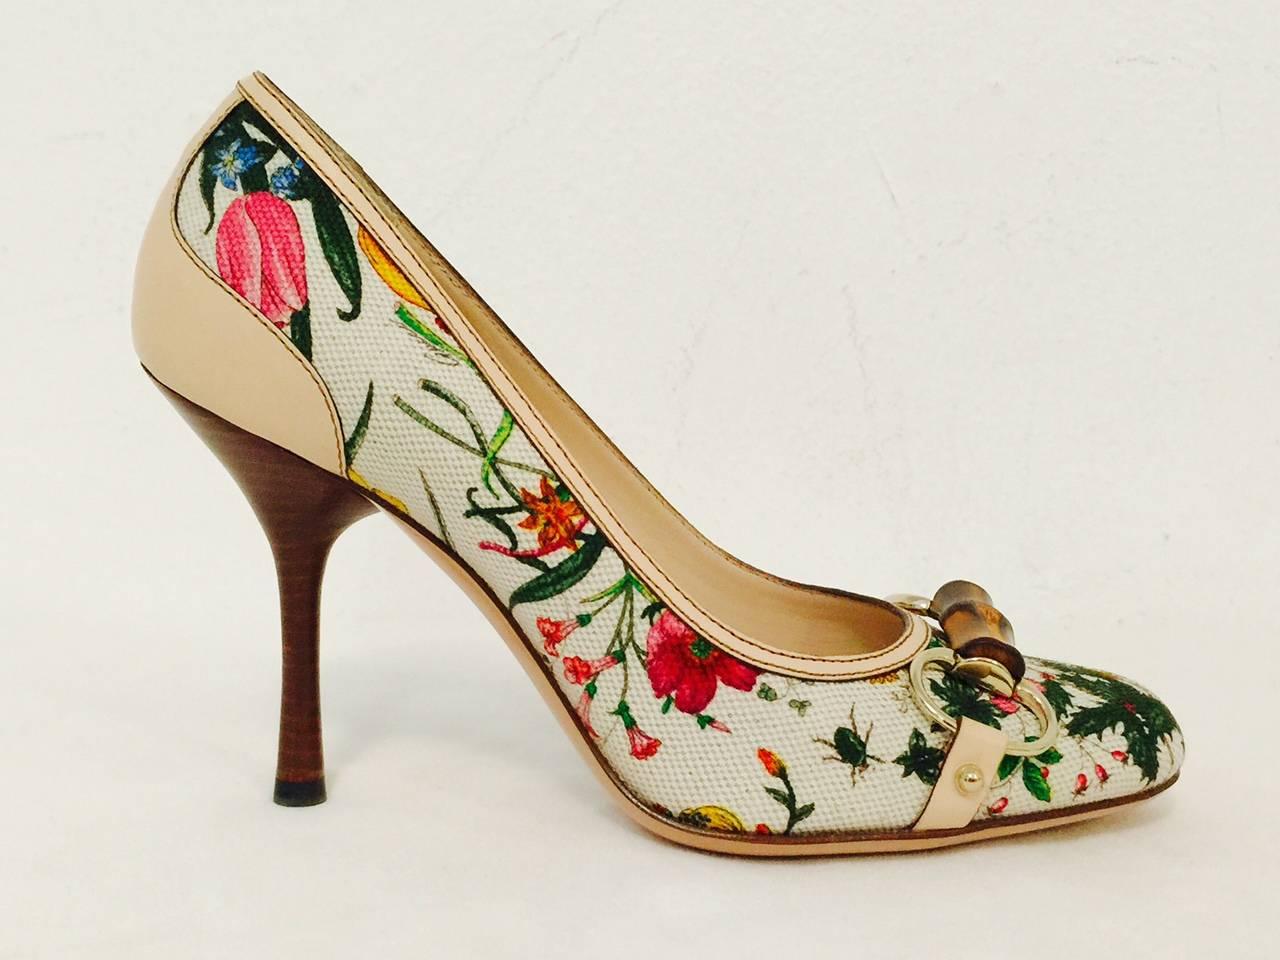 Gucci Floral Print Pumps are perfect for Spring and Summer!  Features instantly recognizable Gucci print with tan leather soles, insoles, lining and counters.  Bamboo bits?  Absolutely!  4